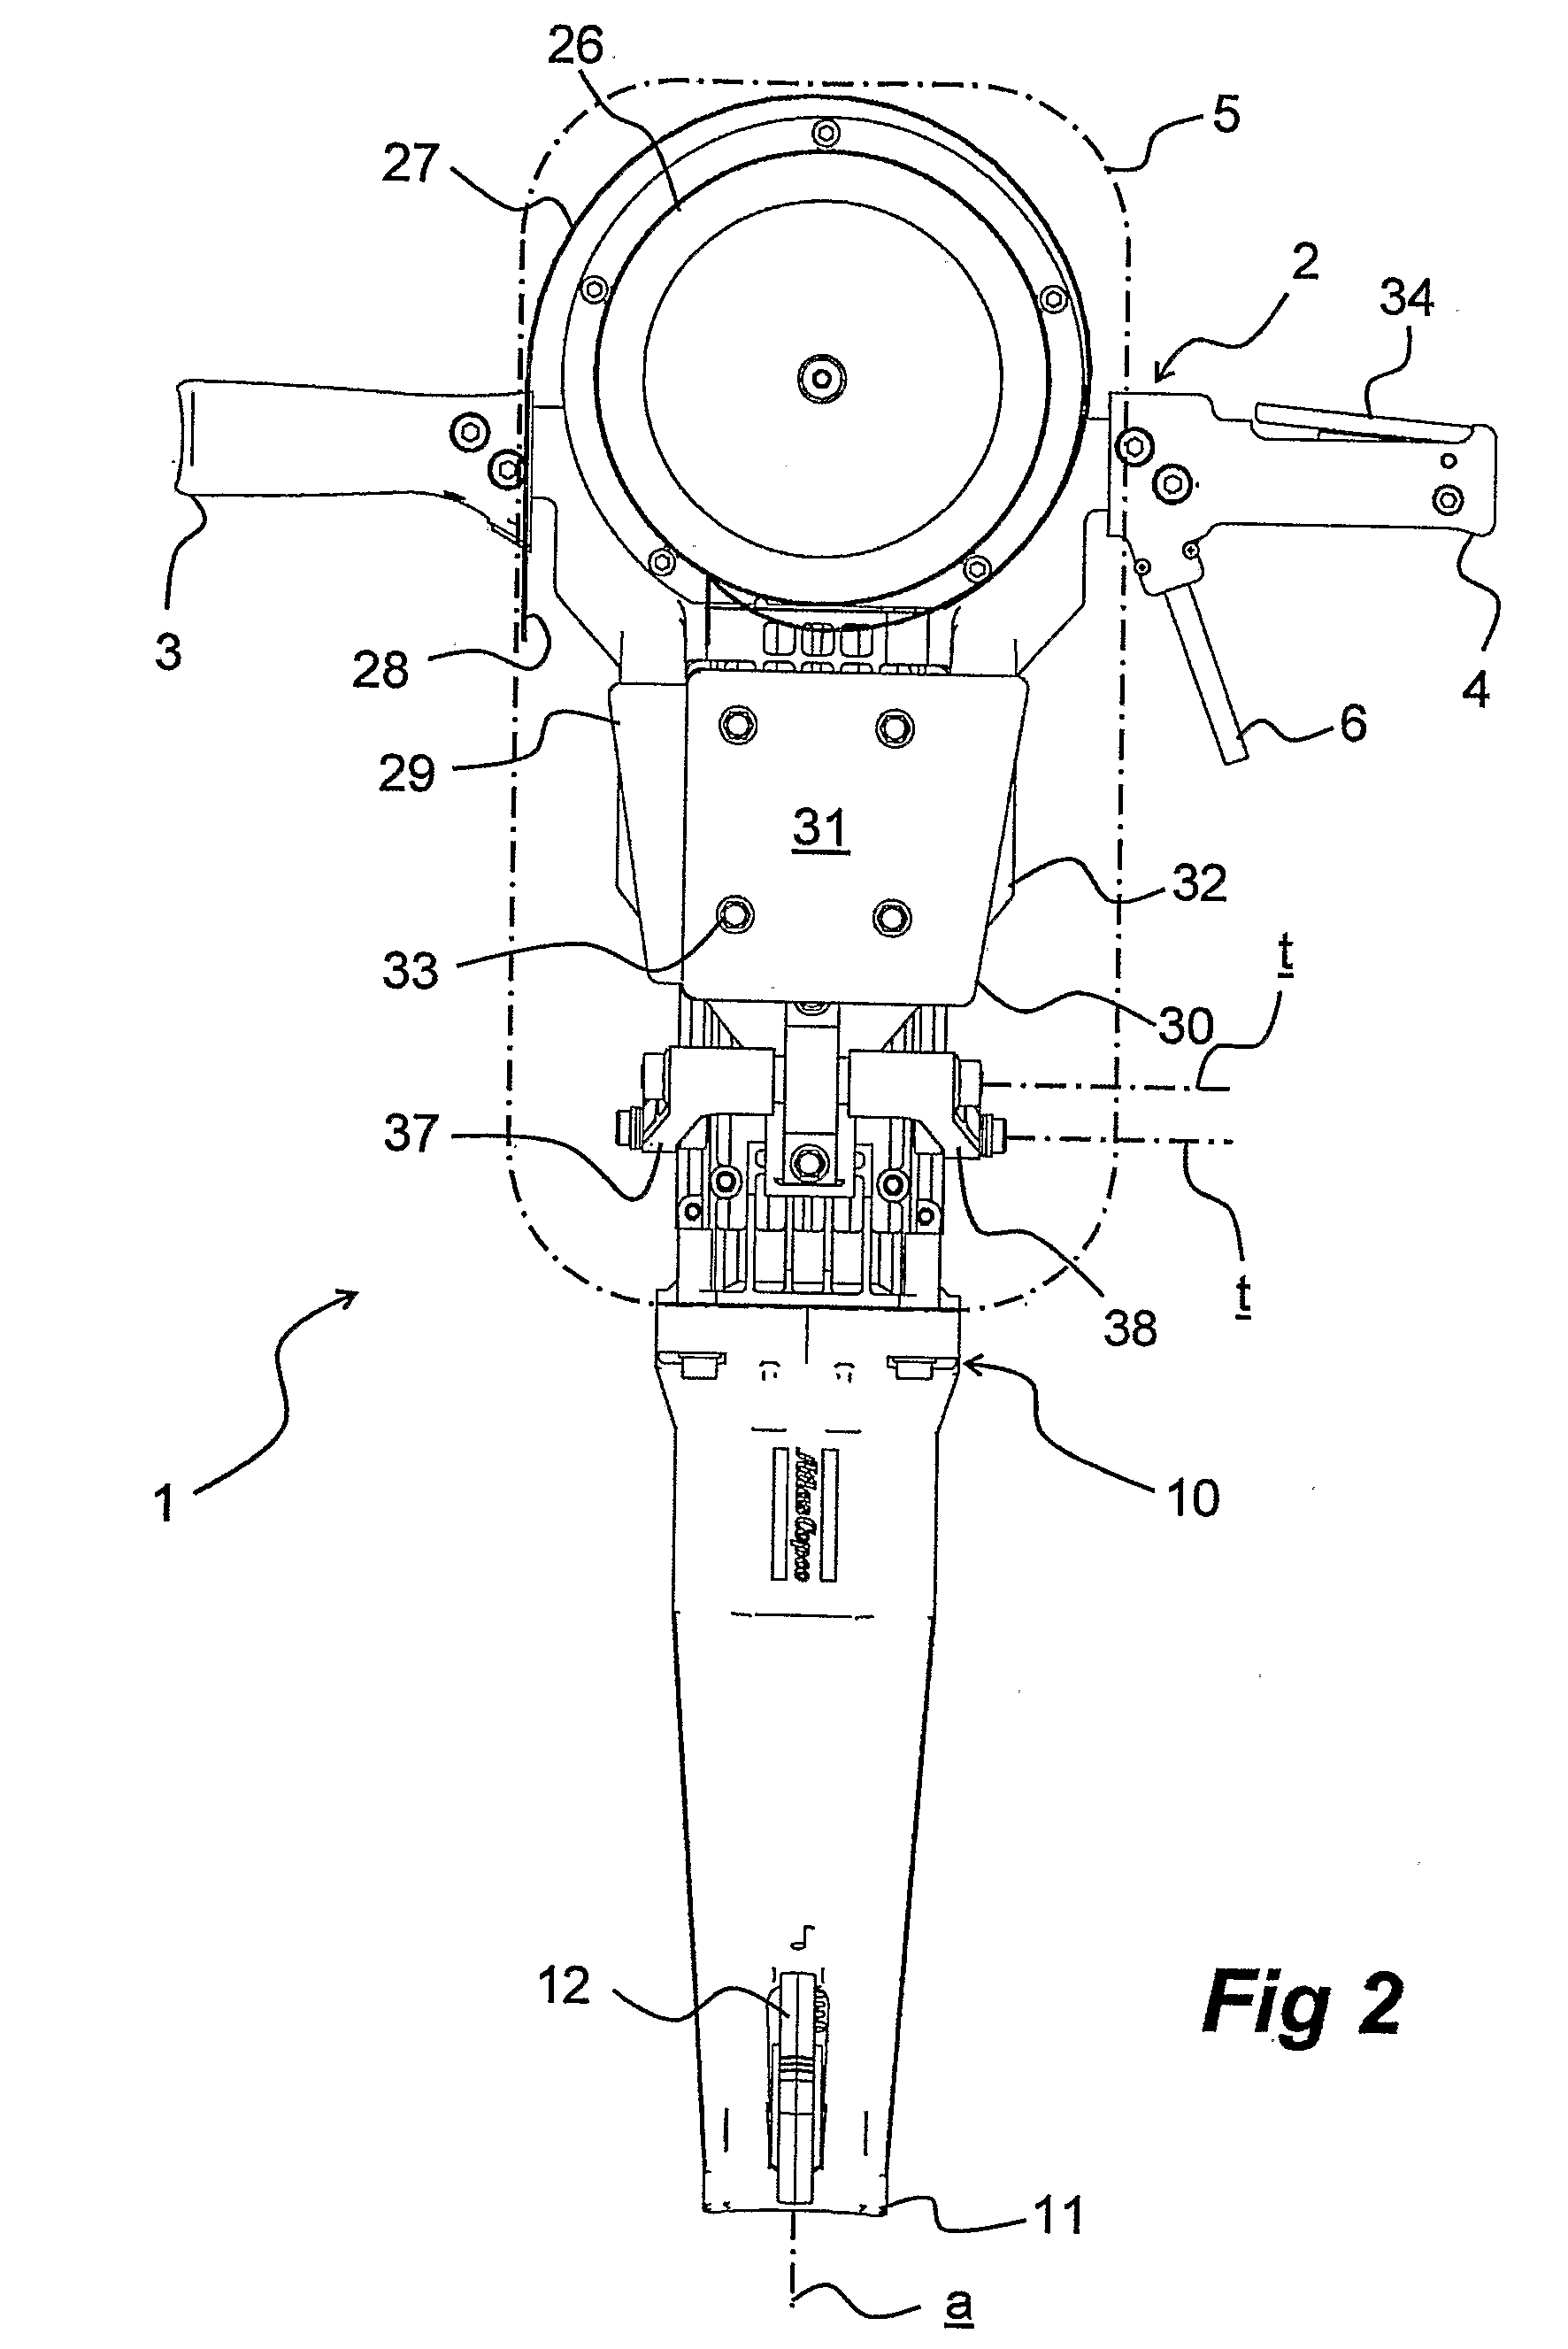 Breaker Tool with Vibration Damped Handle Device